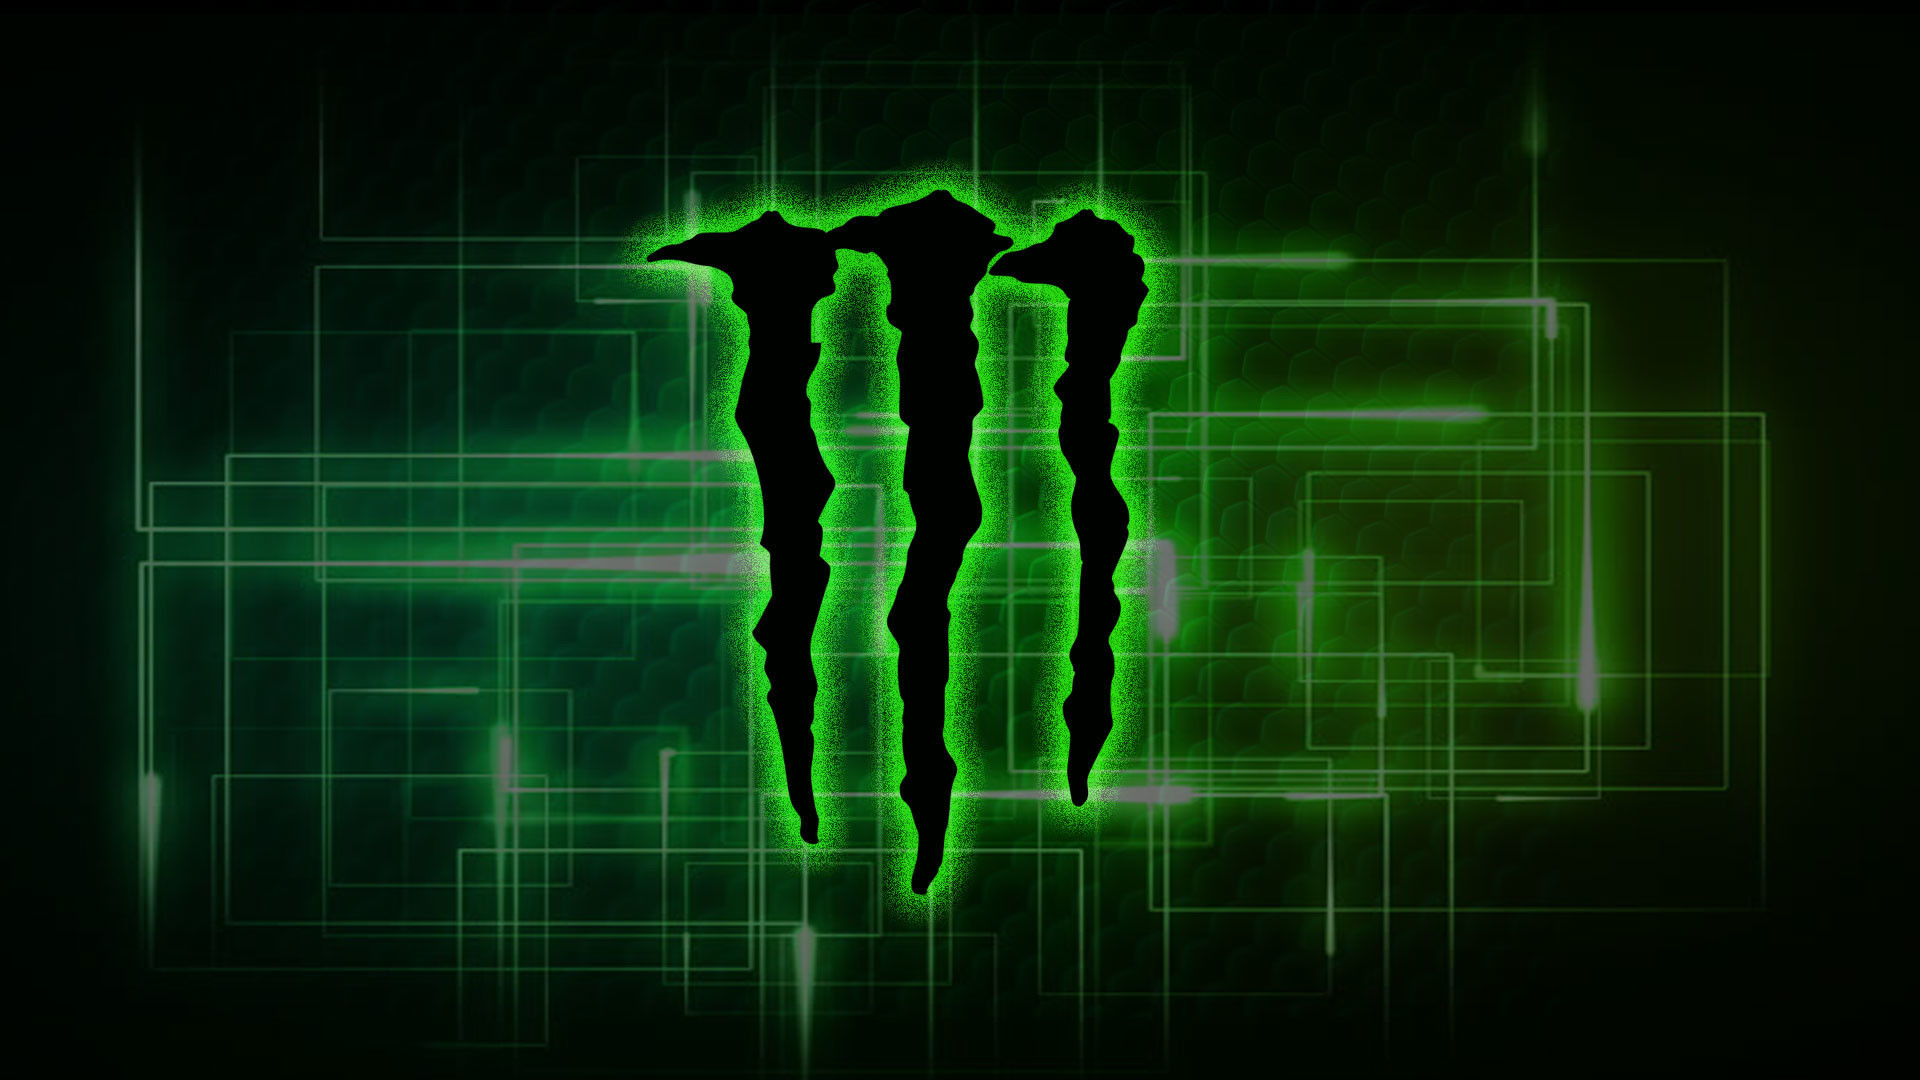 Monster Energy Wallpaper Hd 18 76 Pictures